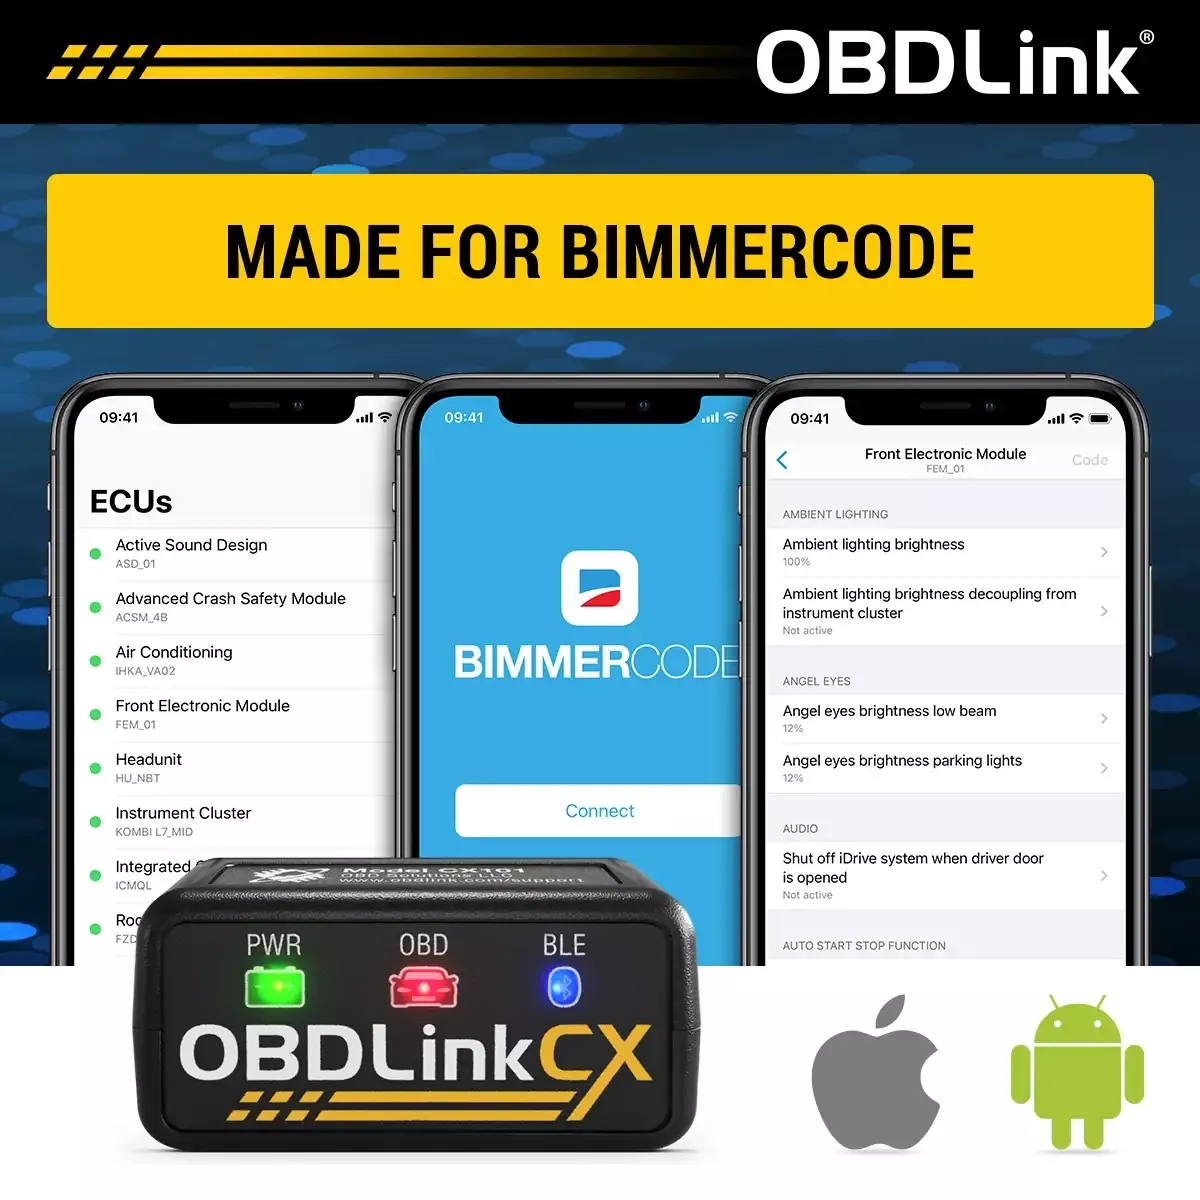 All about the OBDLink CX in combination with Bimmercode